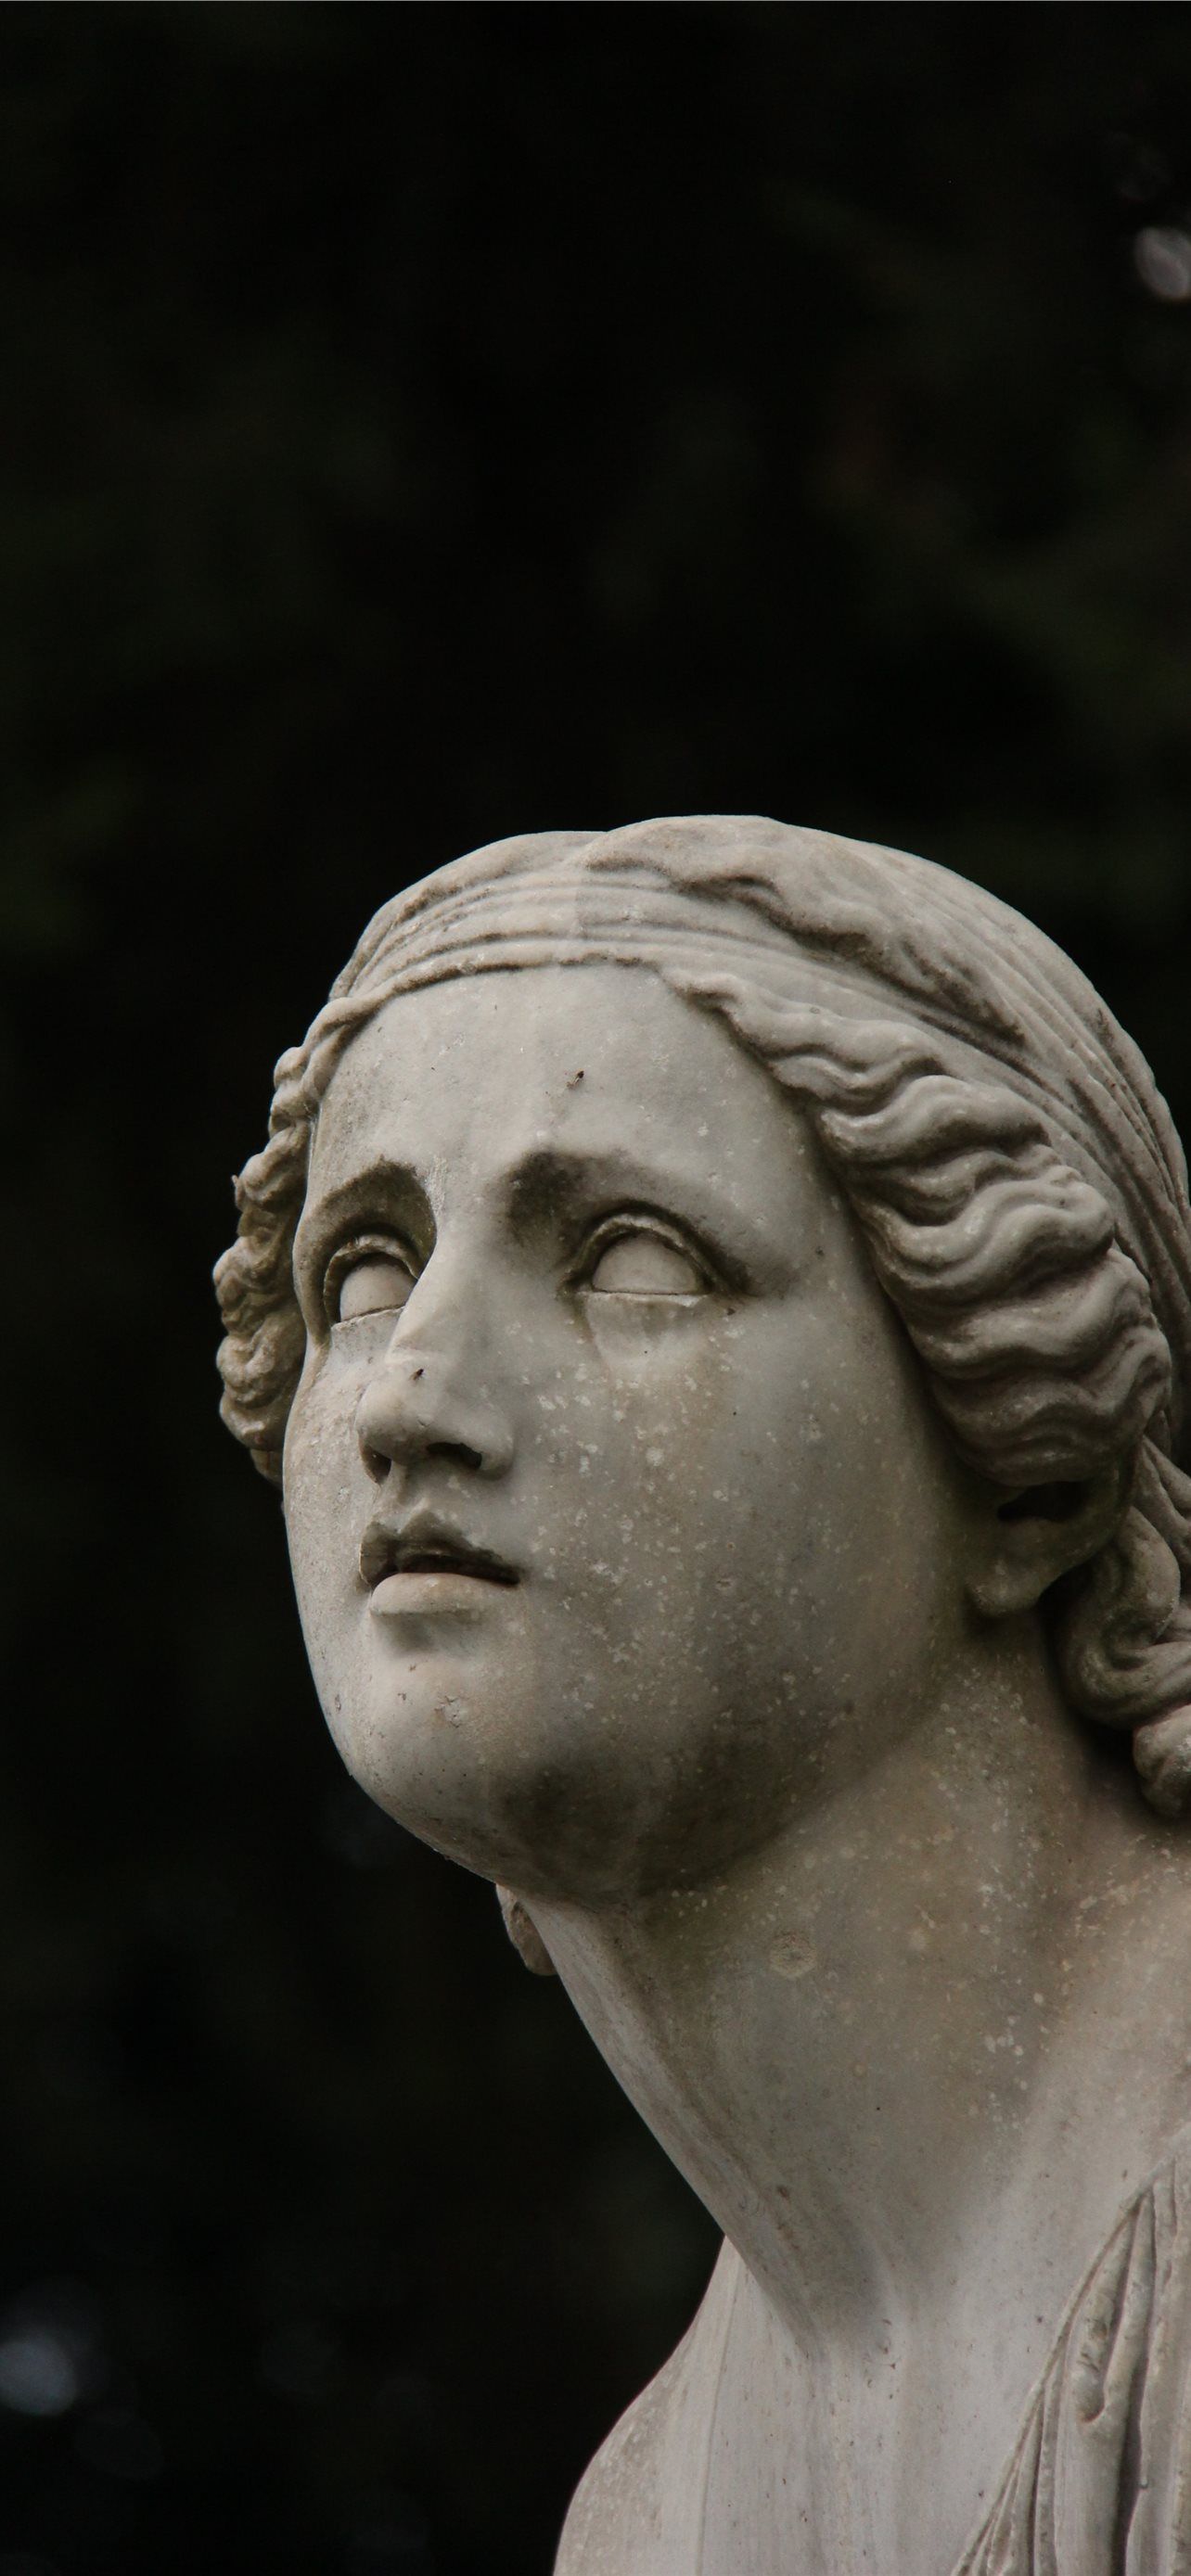 A sculpture of a woman's face and shoulders. - Statue